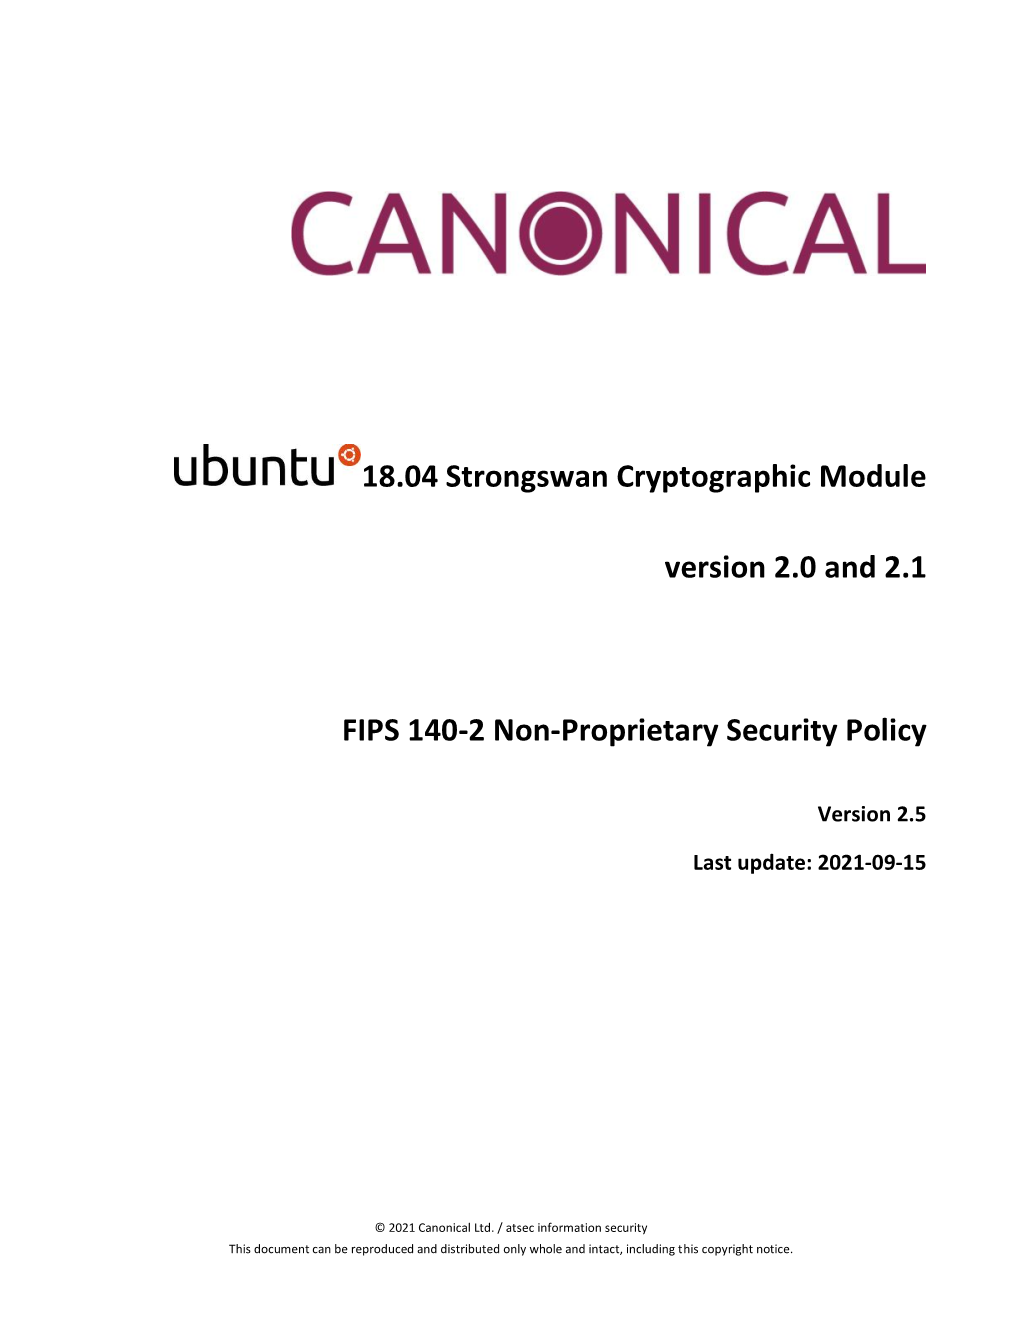 18.04 Strongswan Cryptographic Module Version 2.0 and 2.1 FIPS